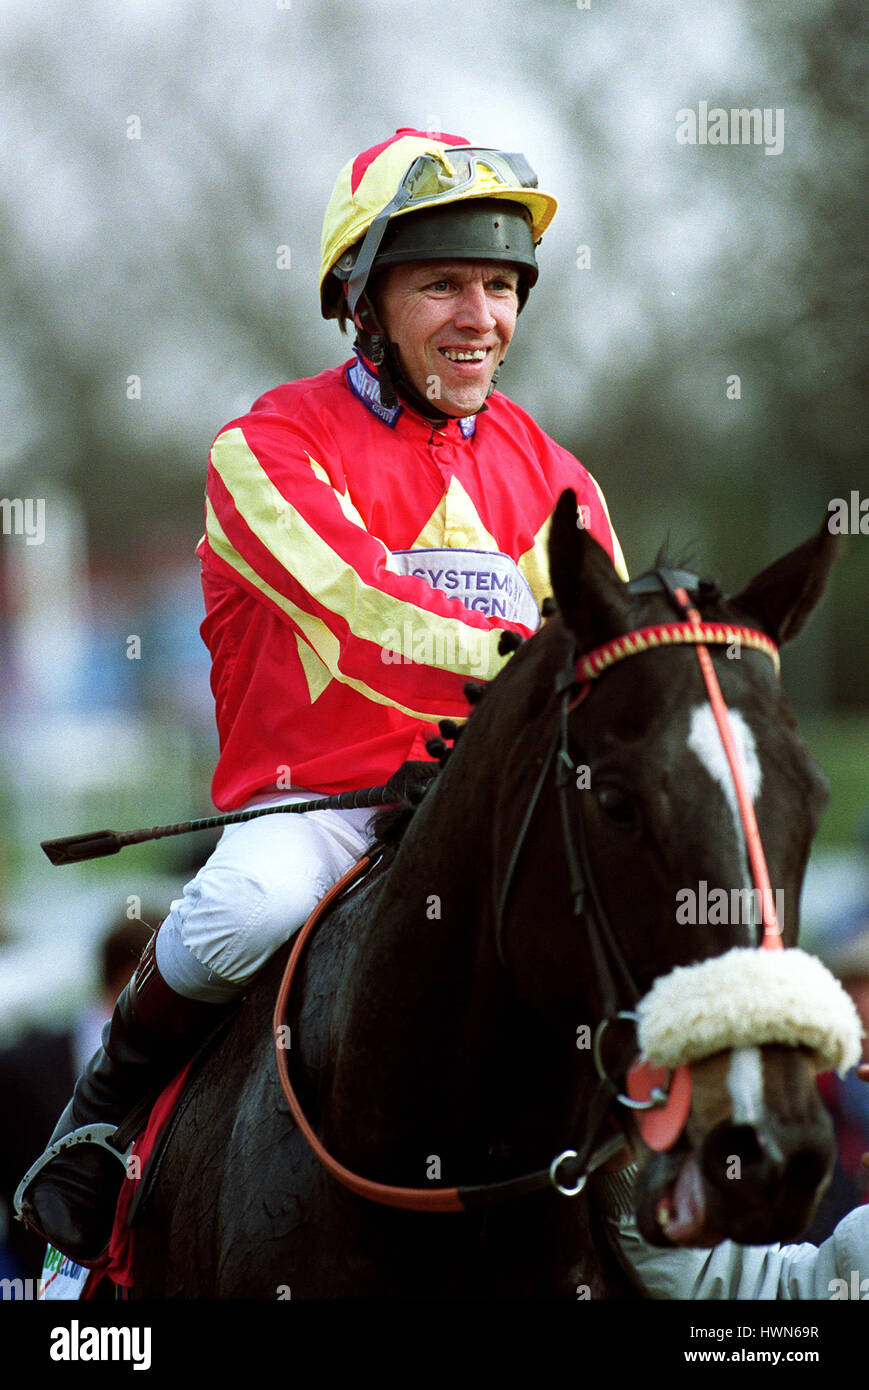 ZUCCHERO. RIDDEN BY S.WHITWORTH DONCASTER RACECOURSE DONCASTER 23 March 2002 Stock Photo